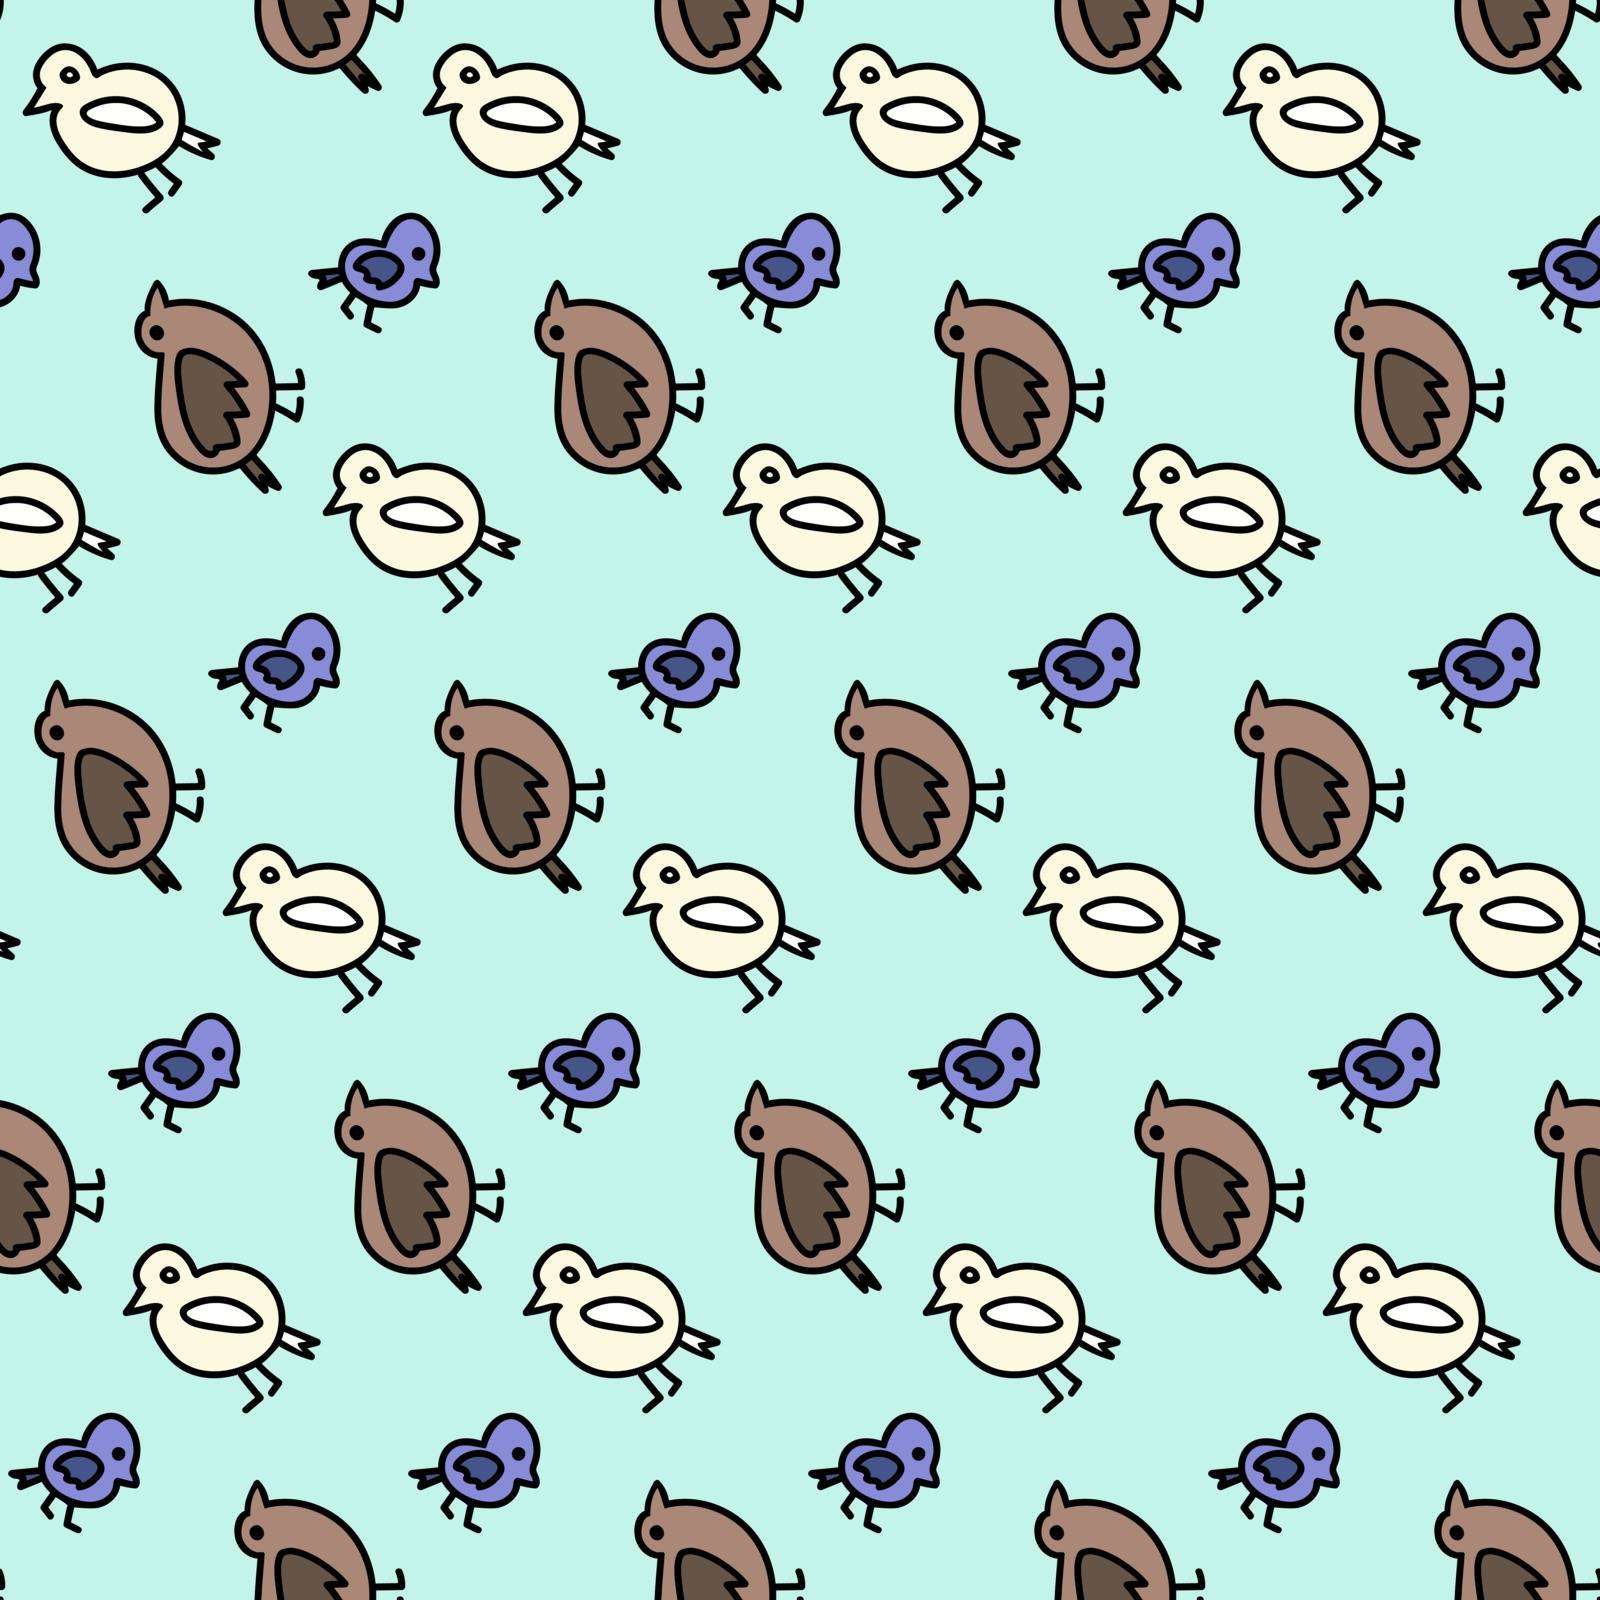 Colorful seamless pattern with simple cartoon birds